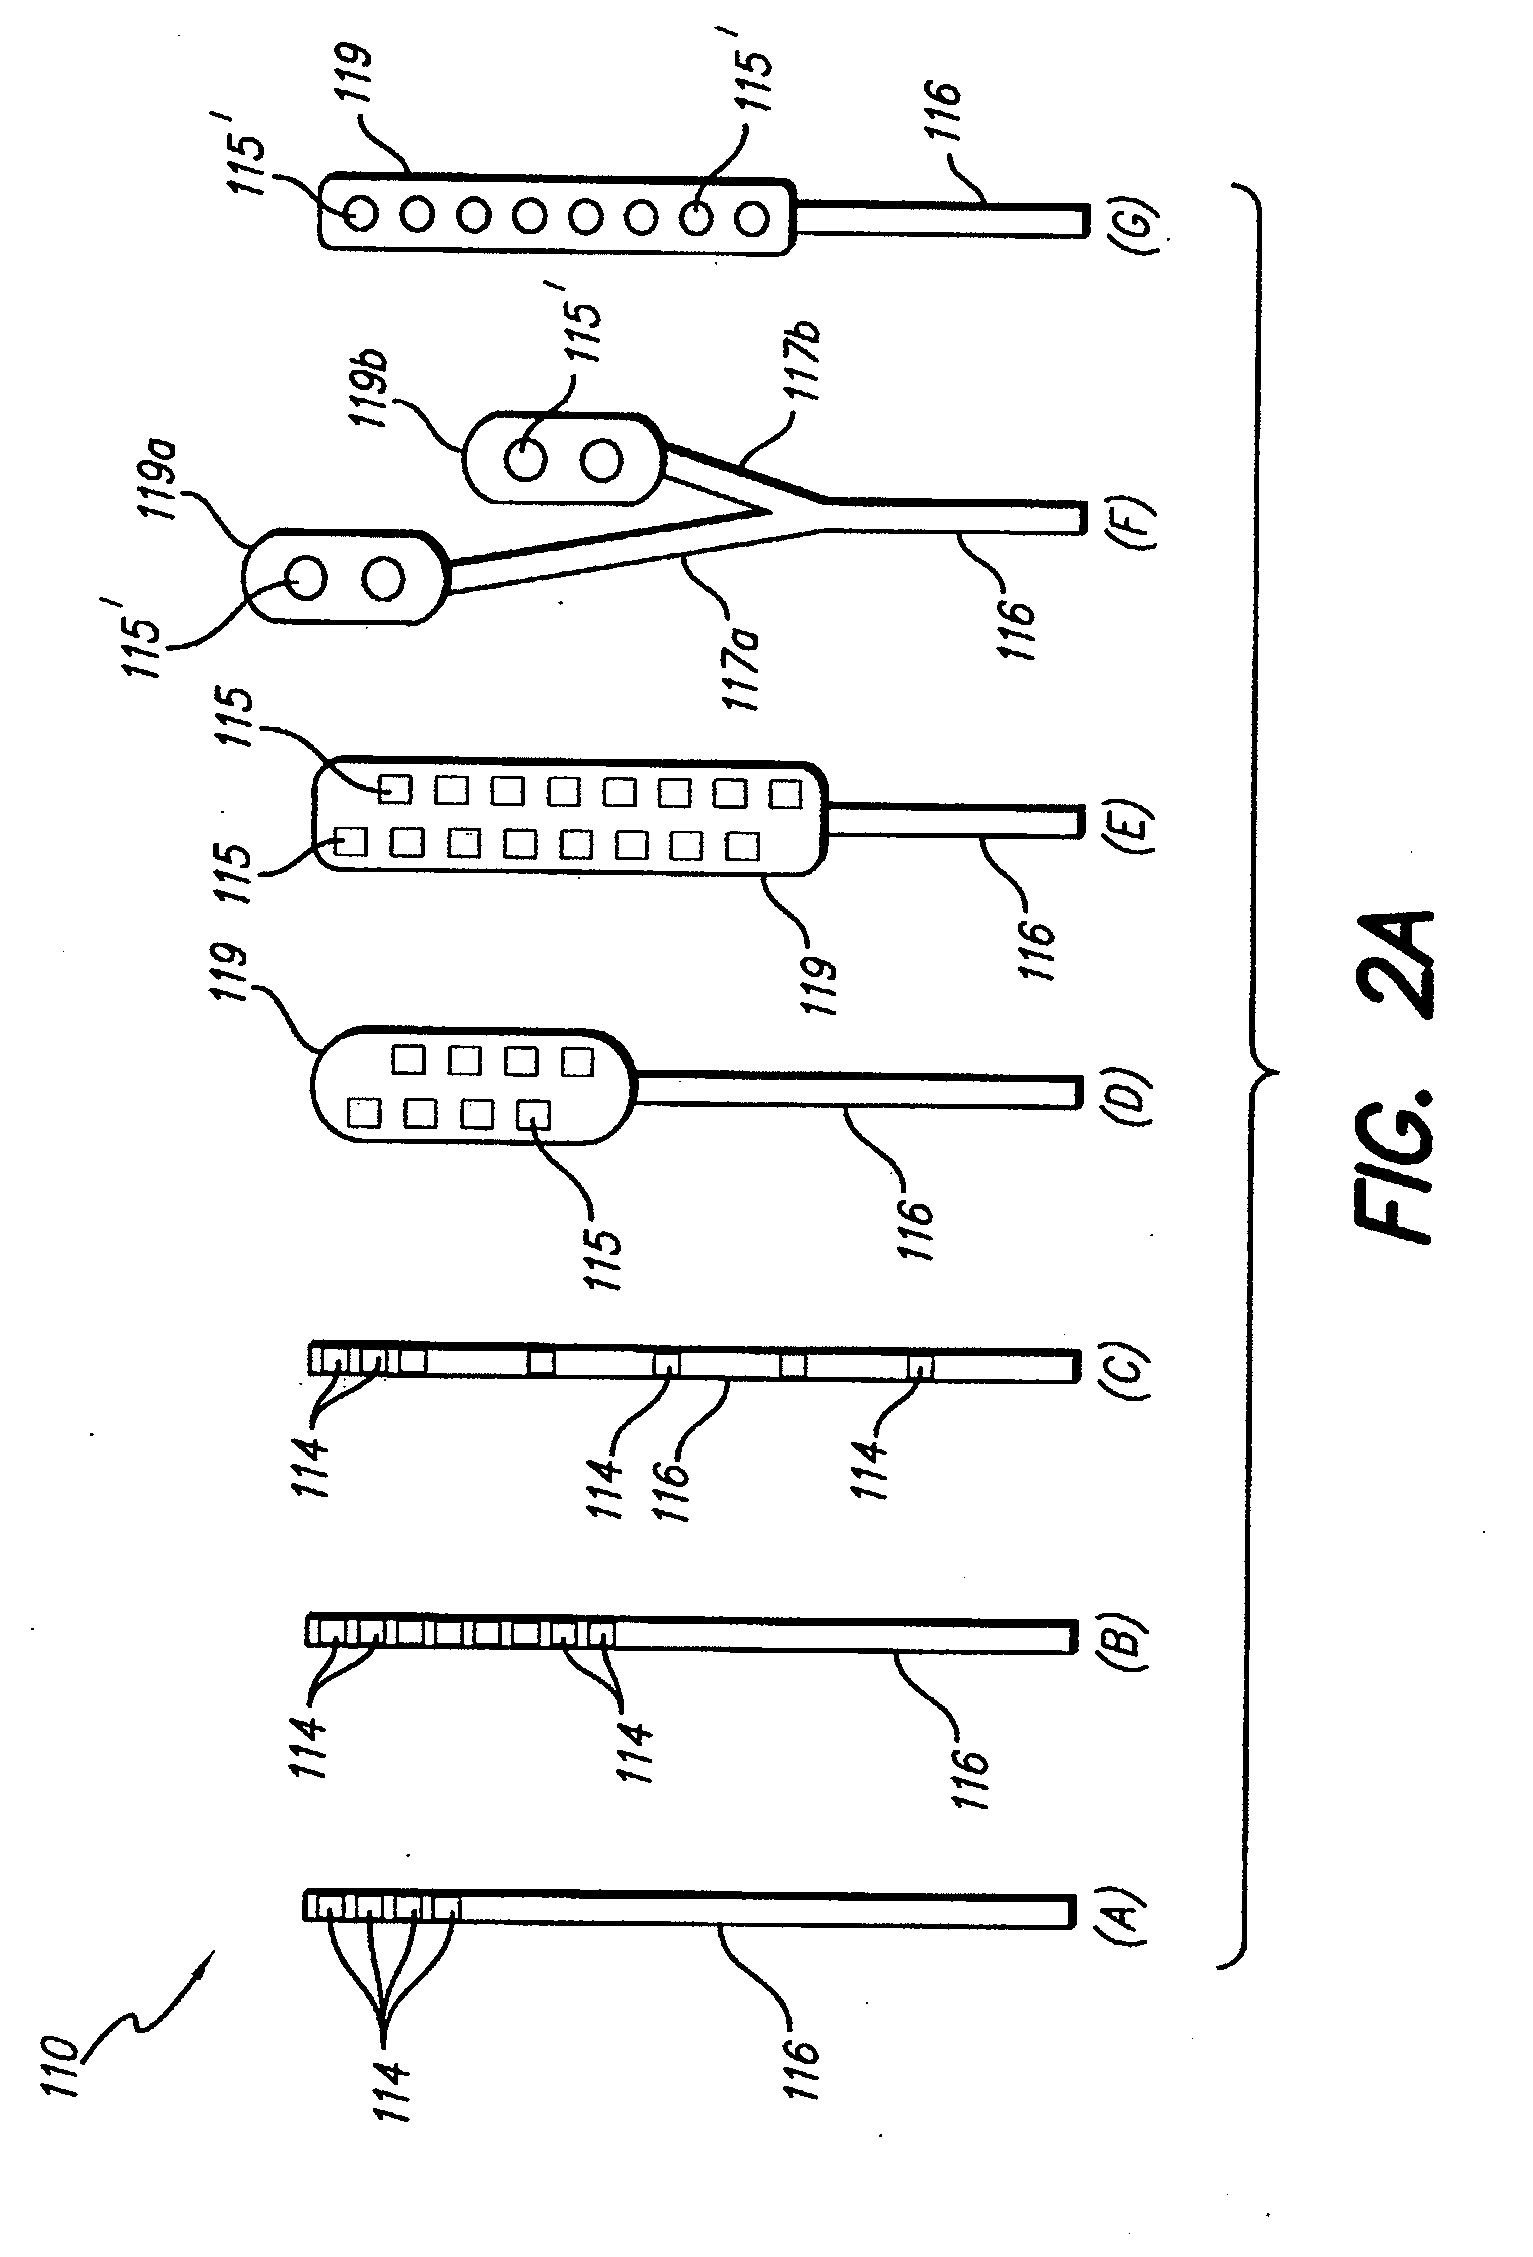 Patient programmer for implantable devices